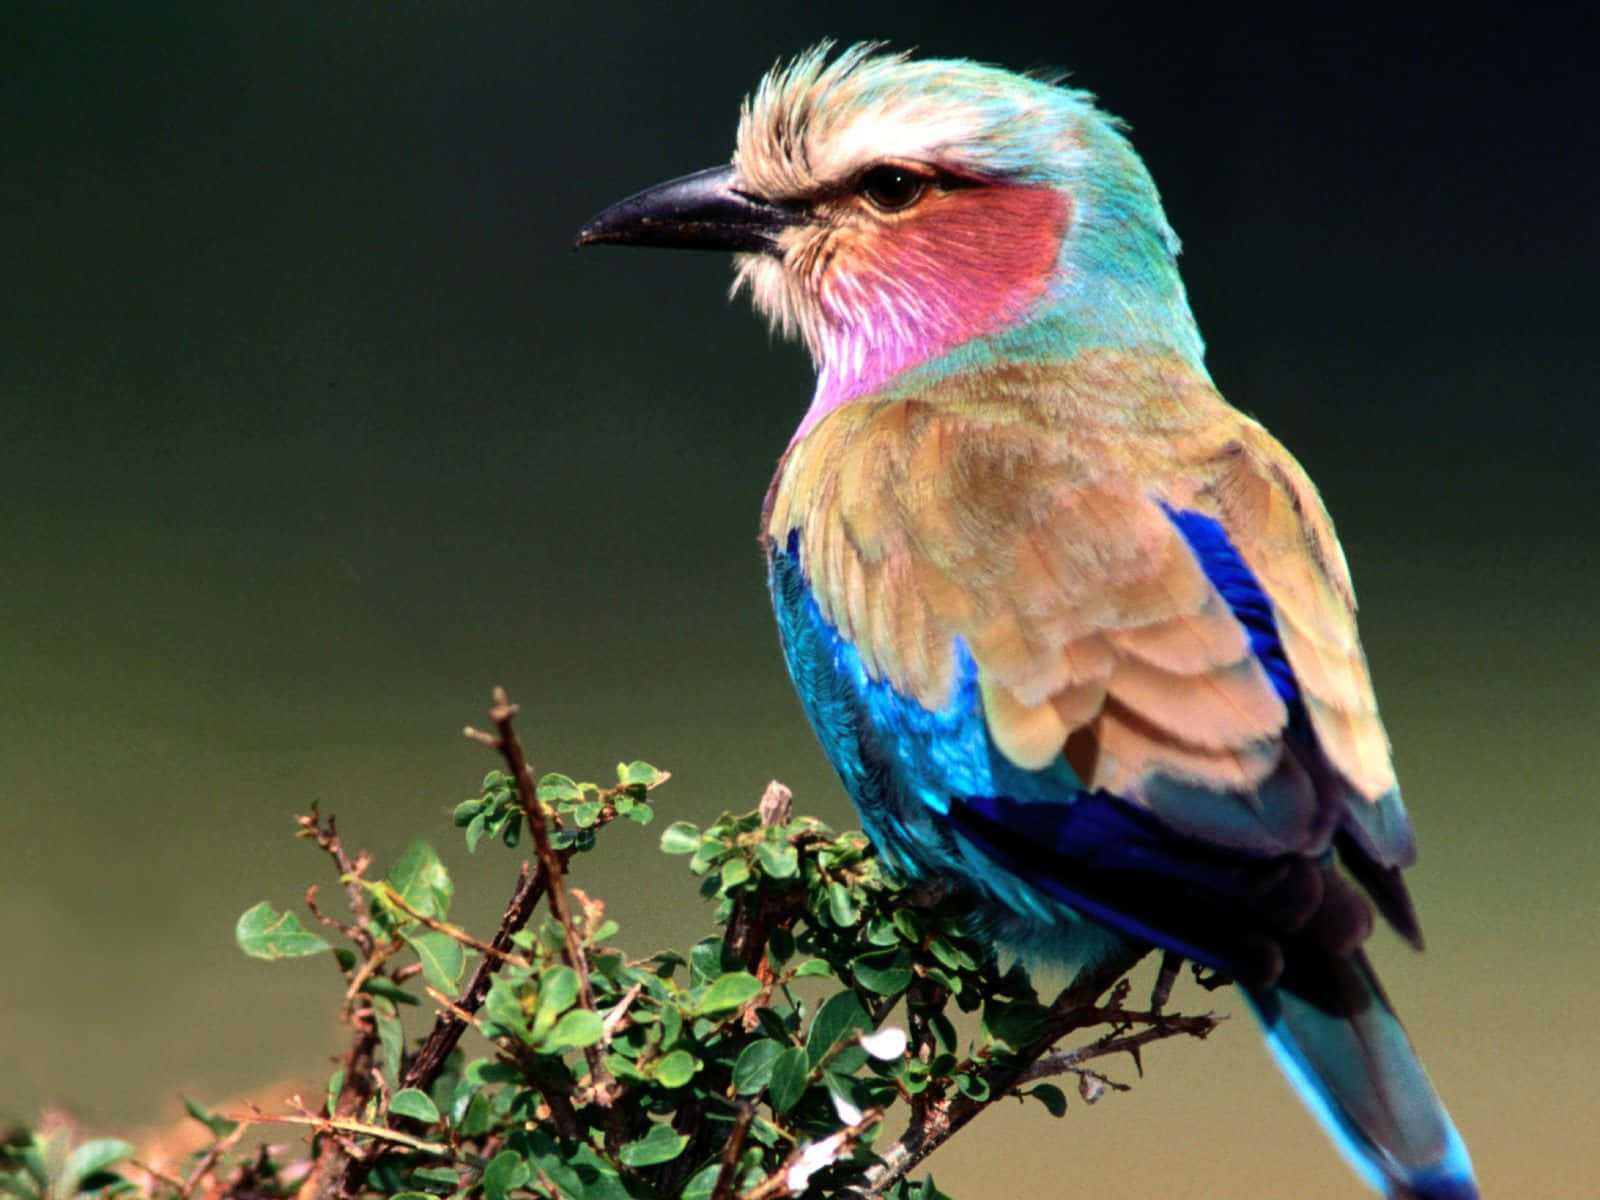 A colorful bird looking up into the sky.